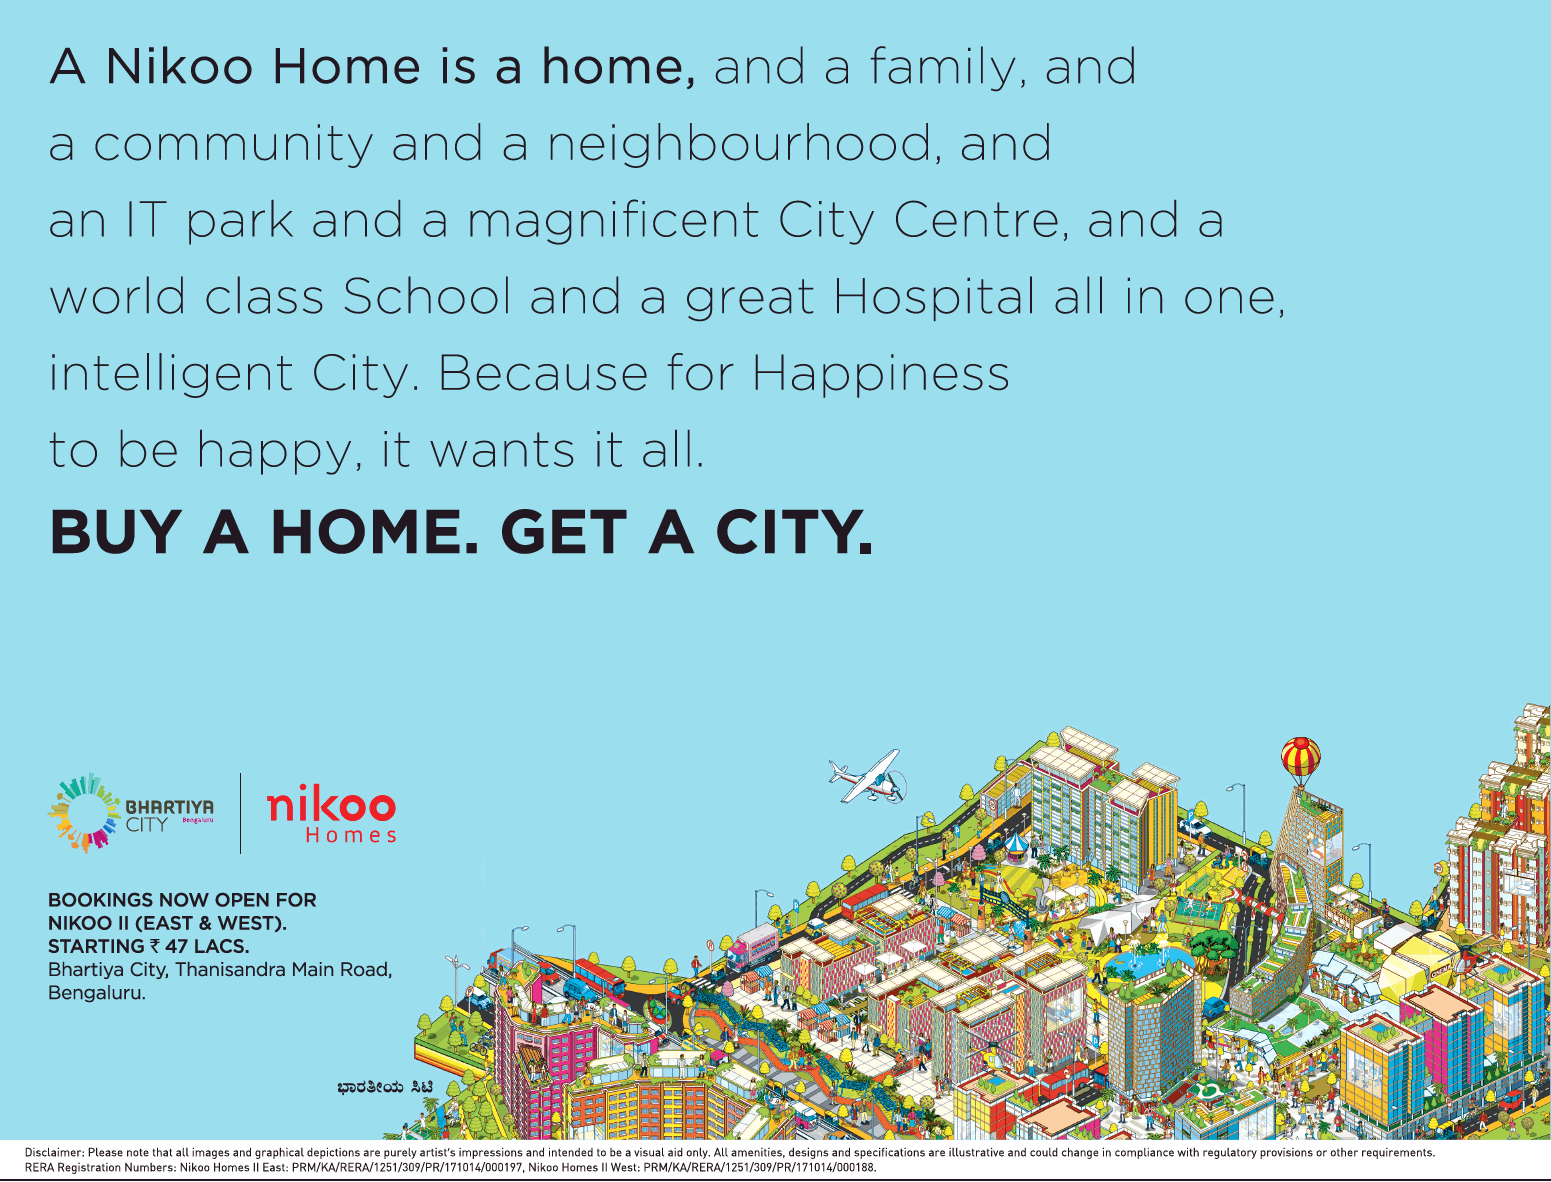 Booking now open for Bhartiye Nikoo Homes 2 in Bangalore Update